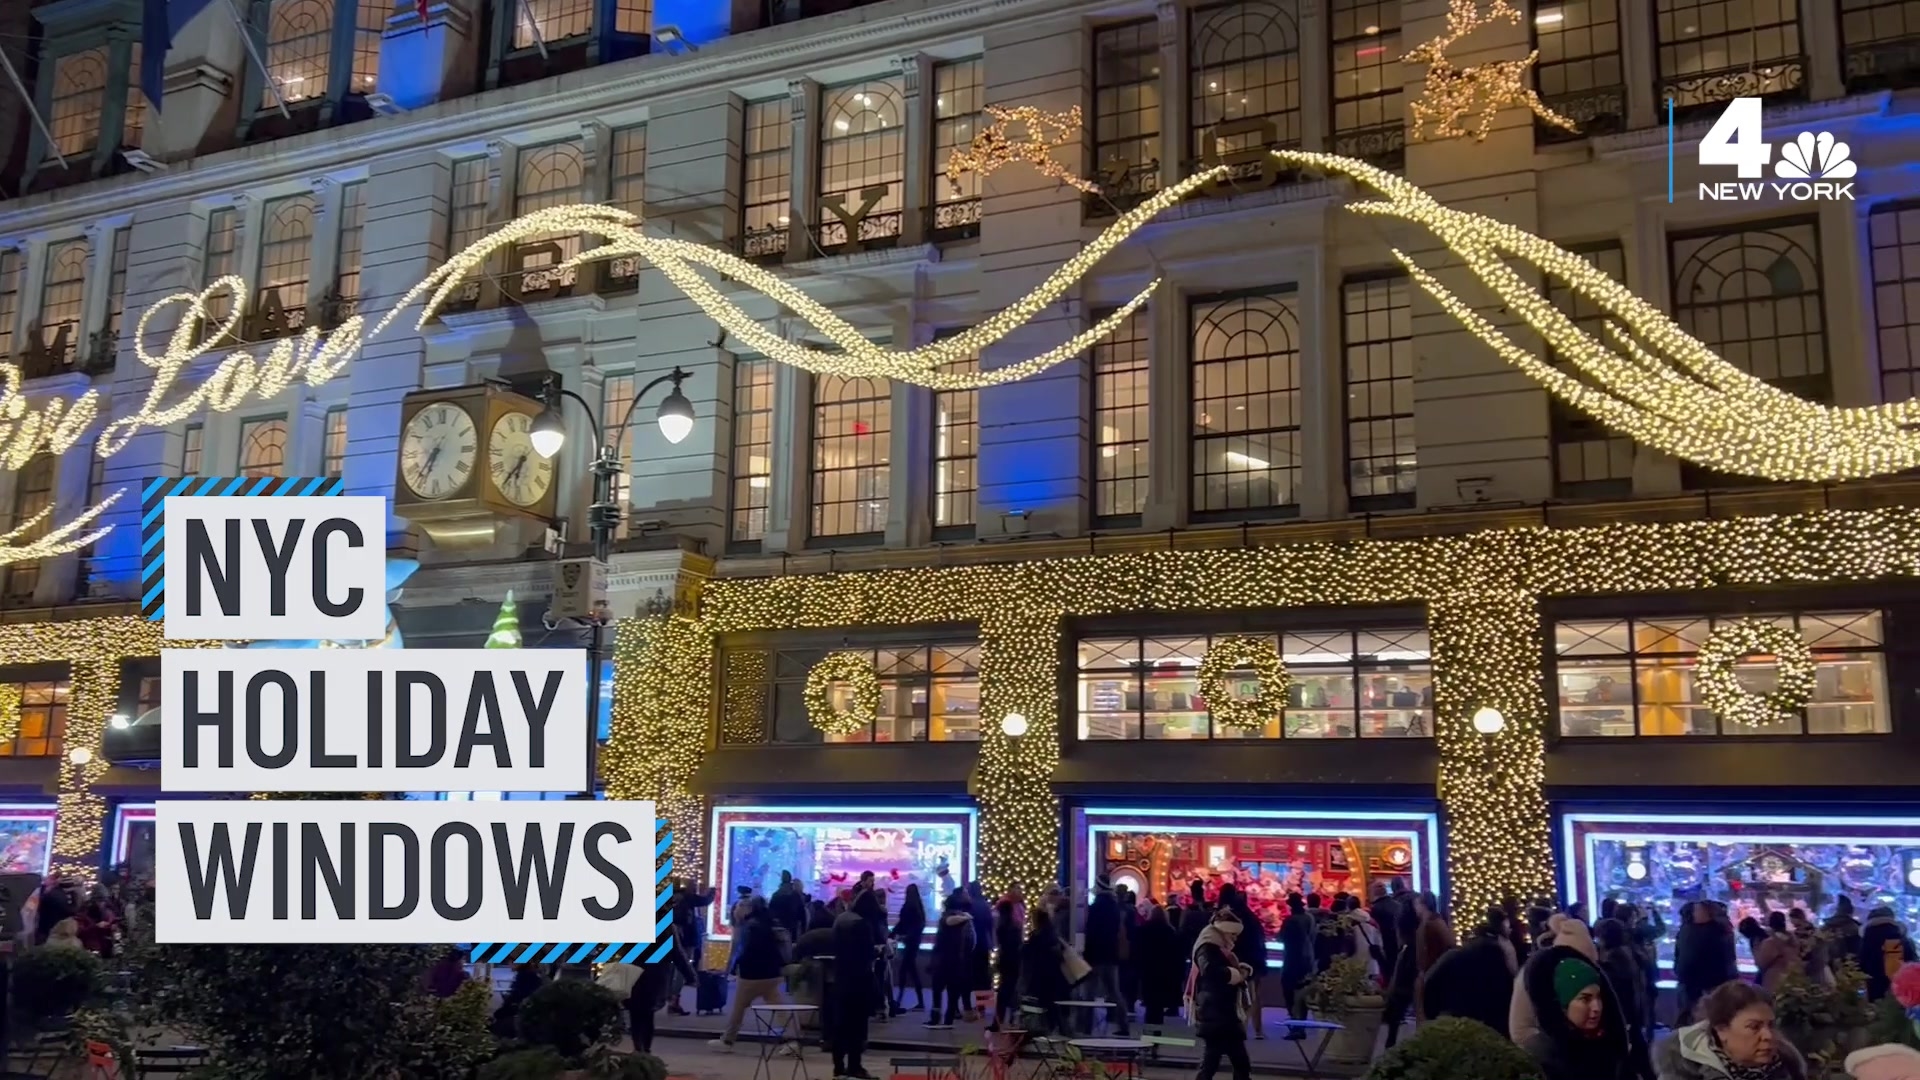 It's Already Time for Holiday Windows